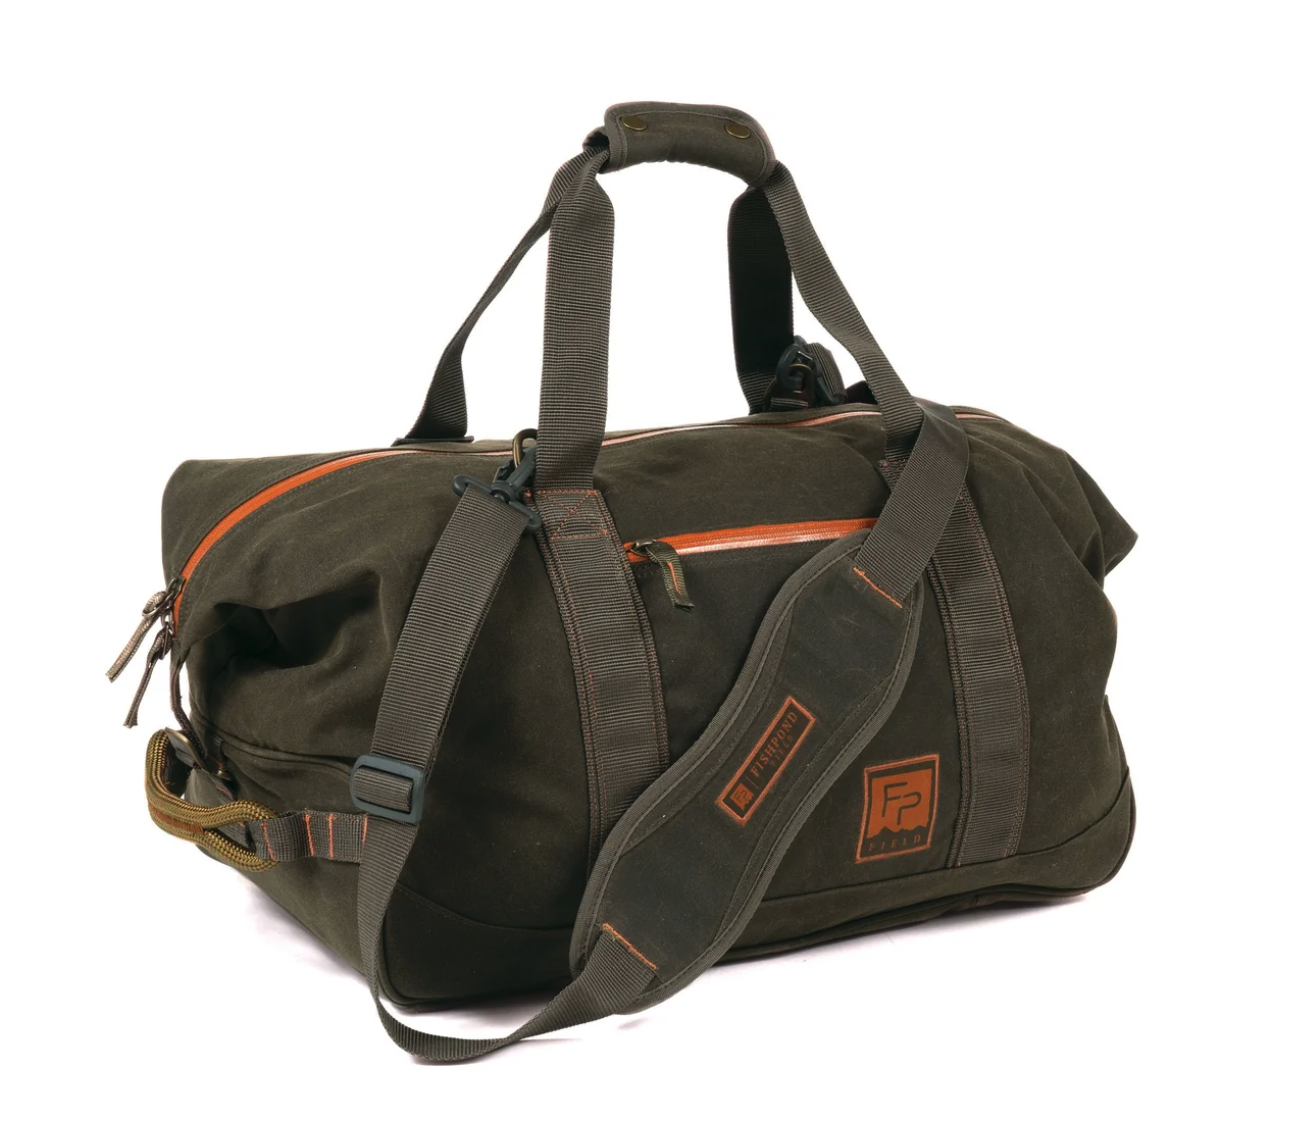 Fishpond Flattops Fly Fishing Wader Duffel for sale online